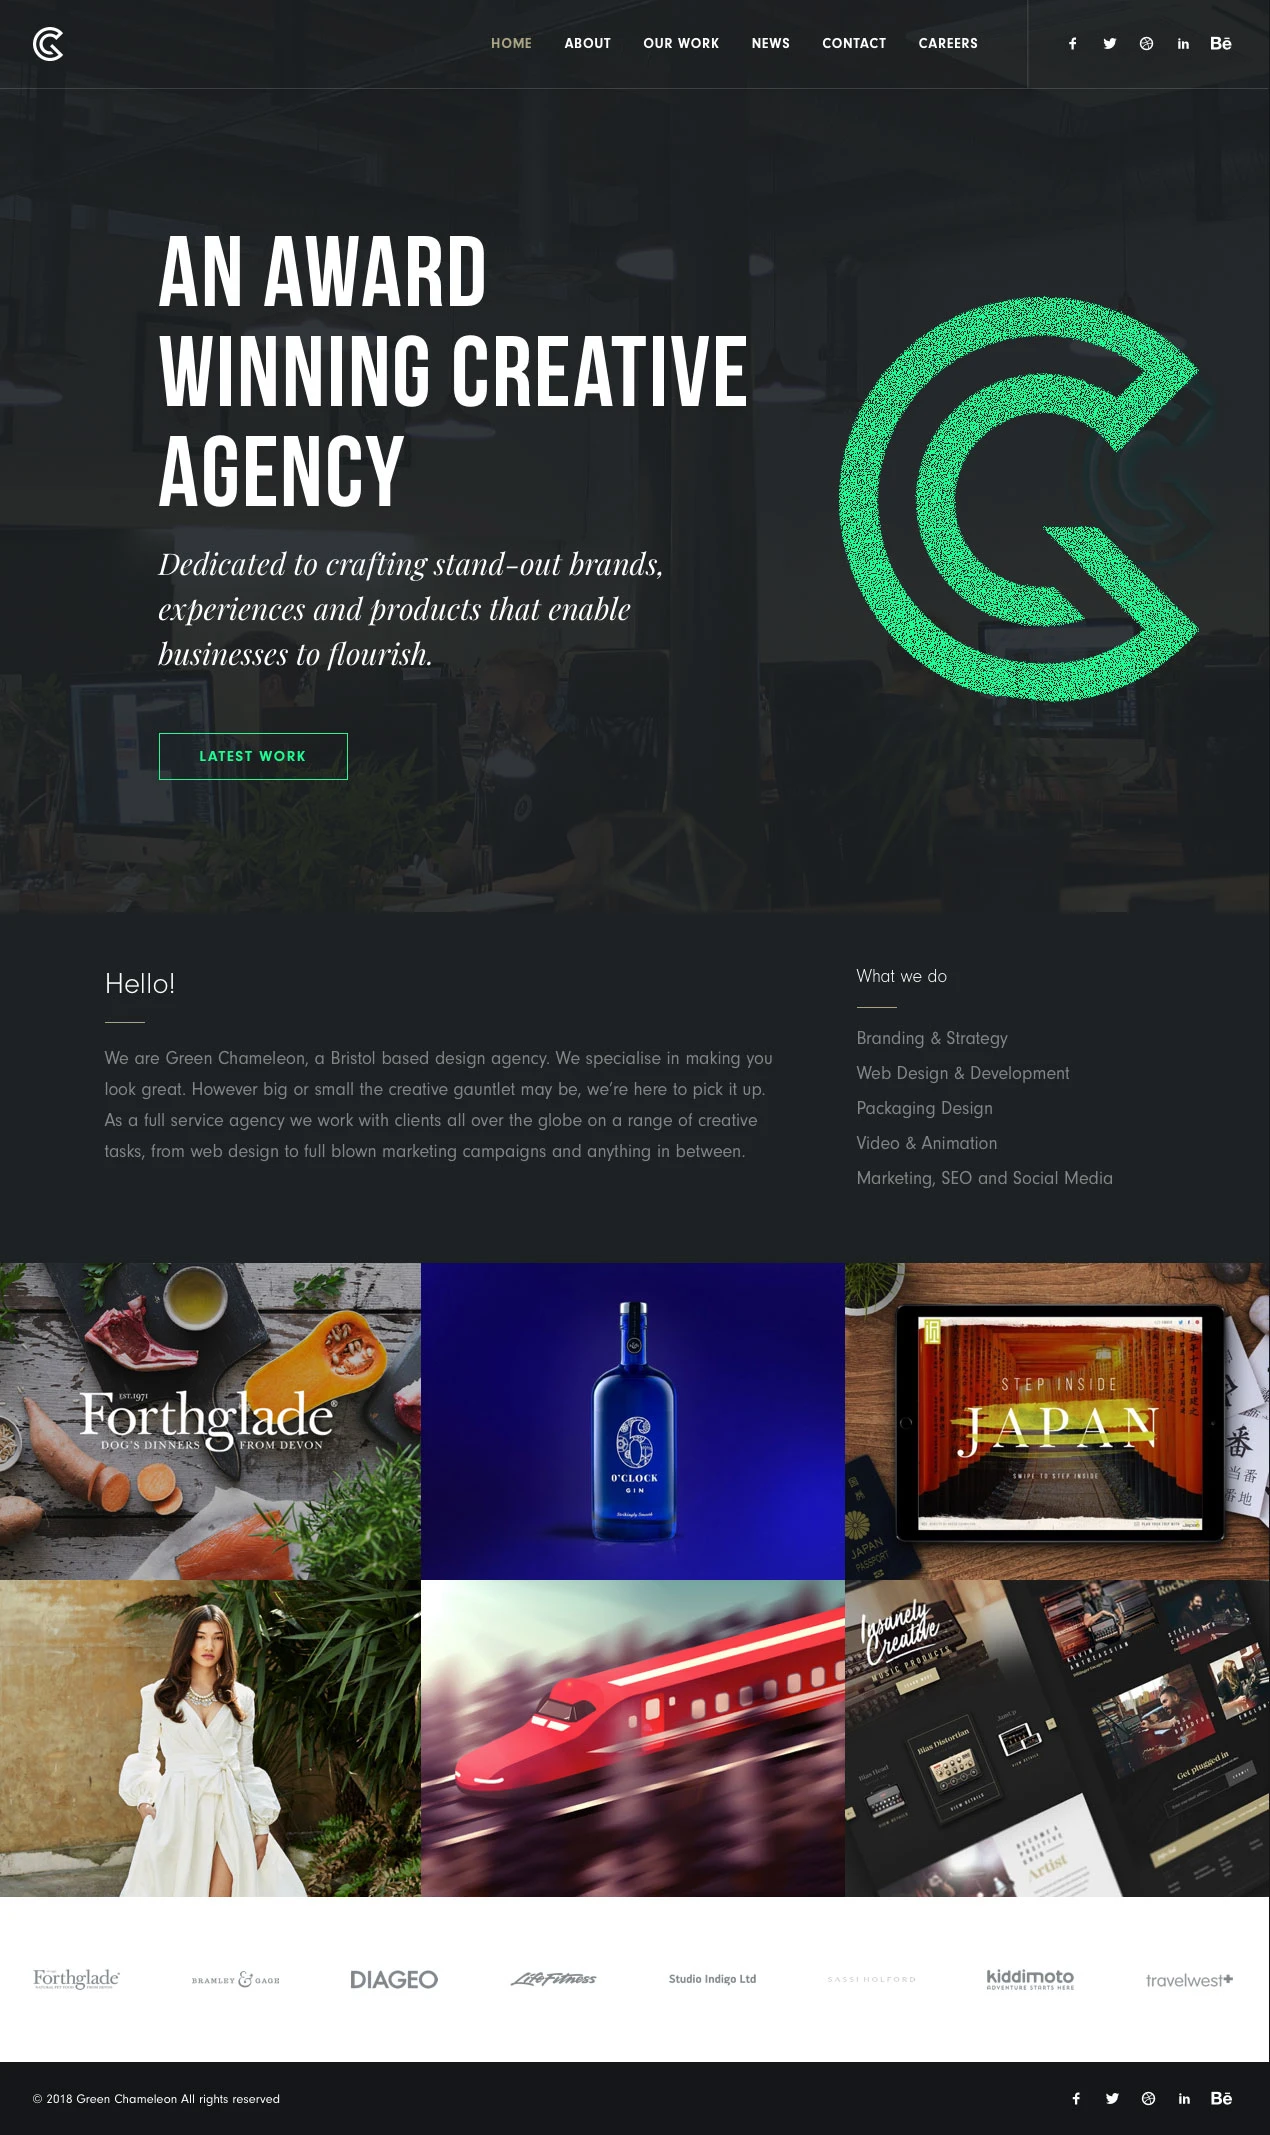 Green Chameleon Landing Page Example: Dedicated to crafting stand-out brands, experiences and products that enable businesses to flourish.